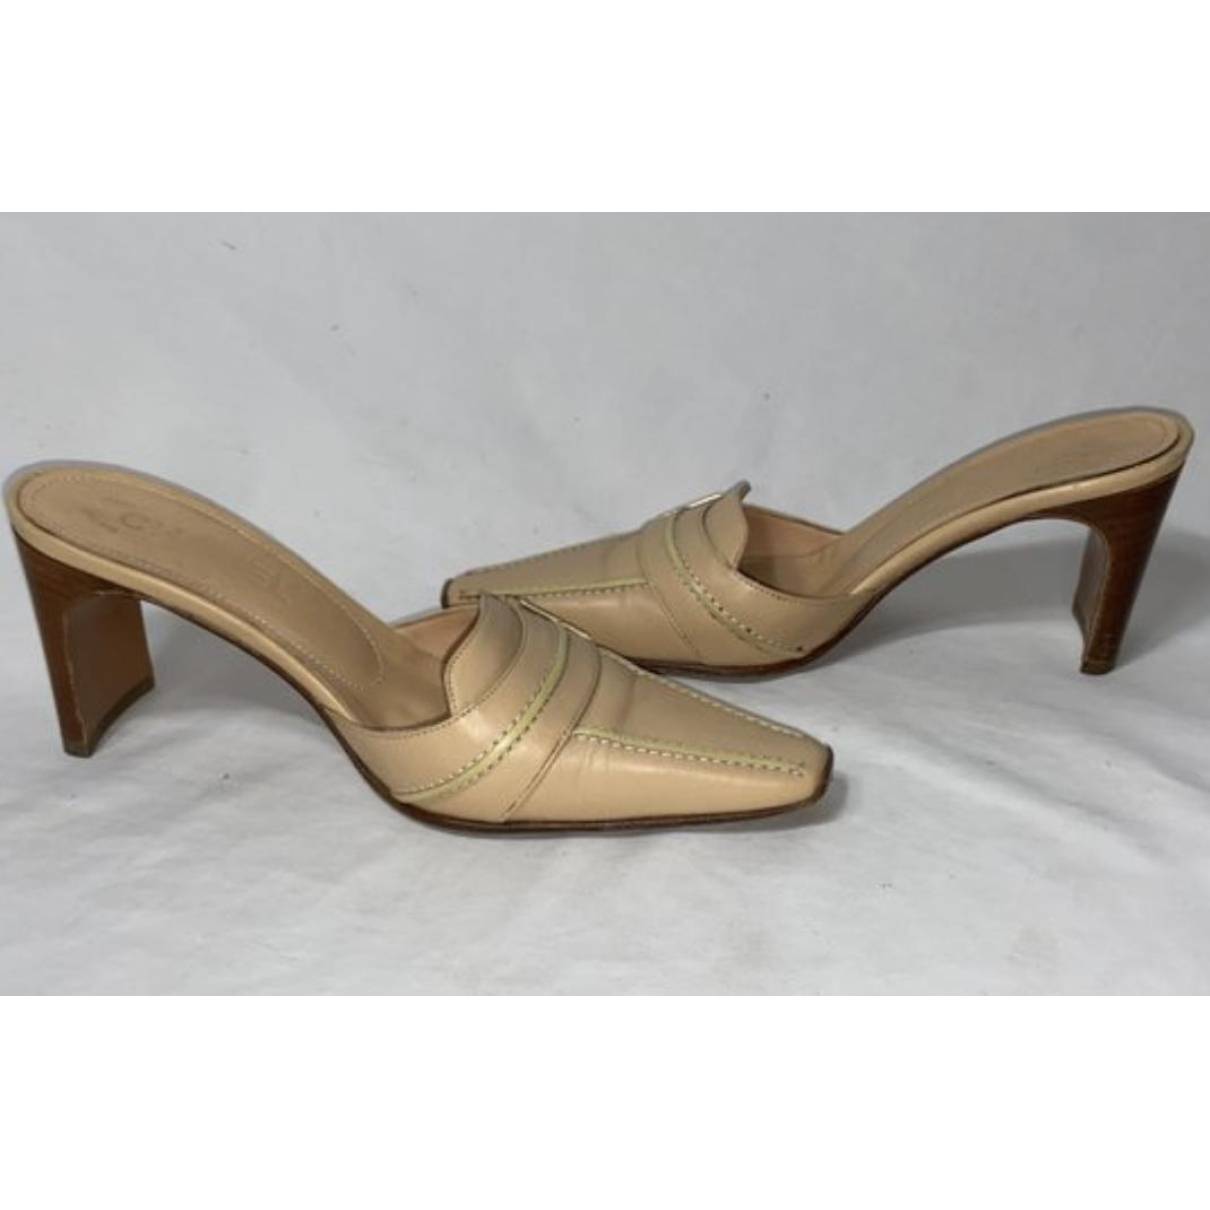 Chanel - Authenticated Mules - Patent Leather Beige Plain for Women, Very Good Condition